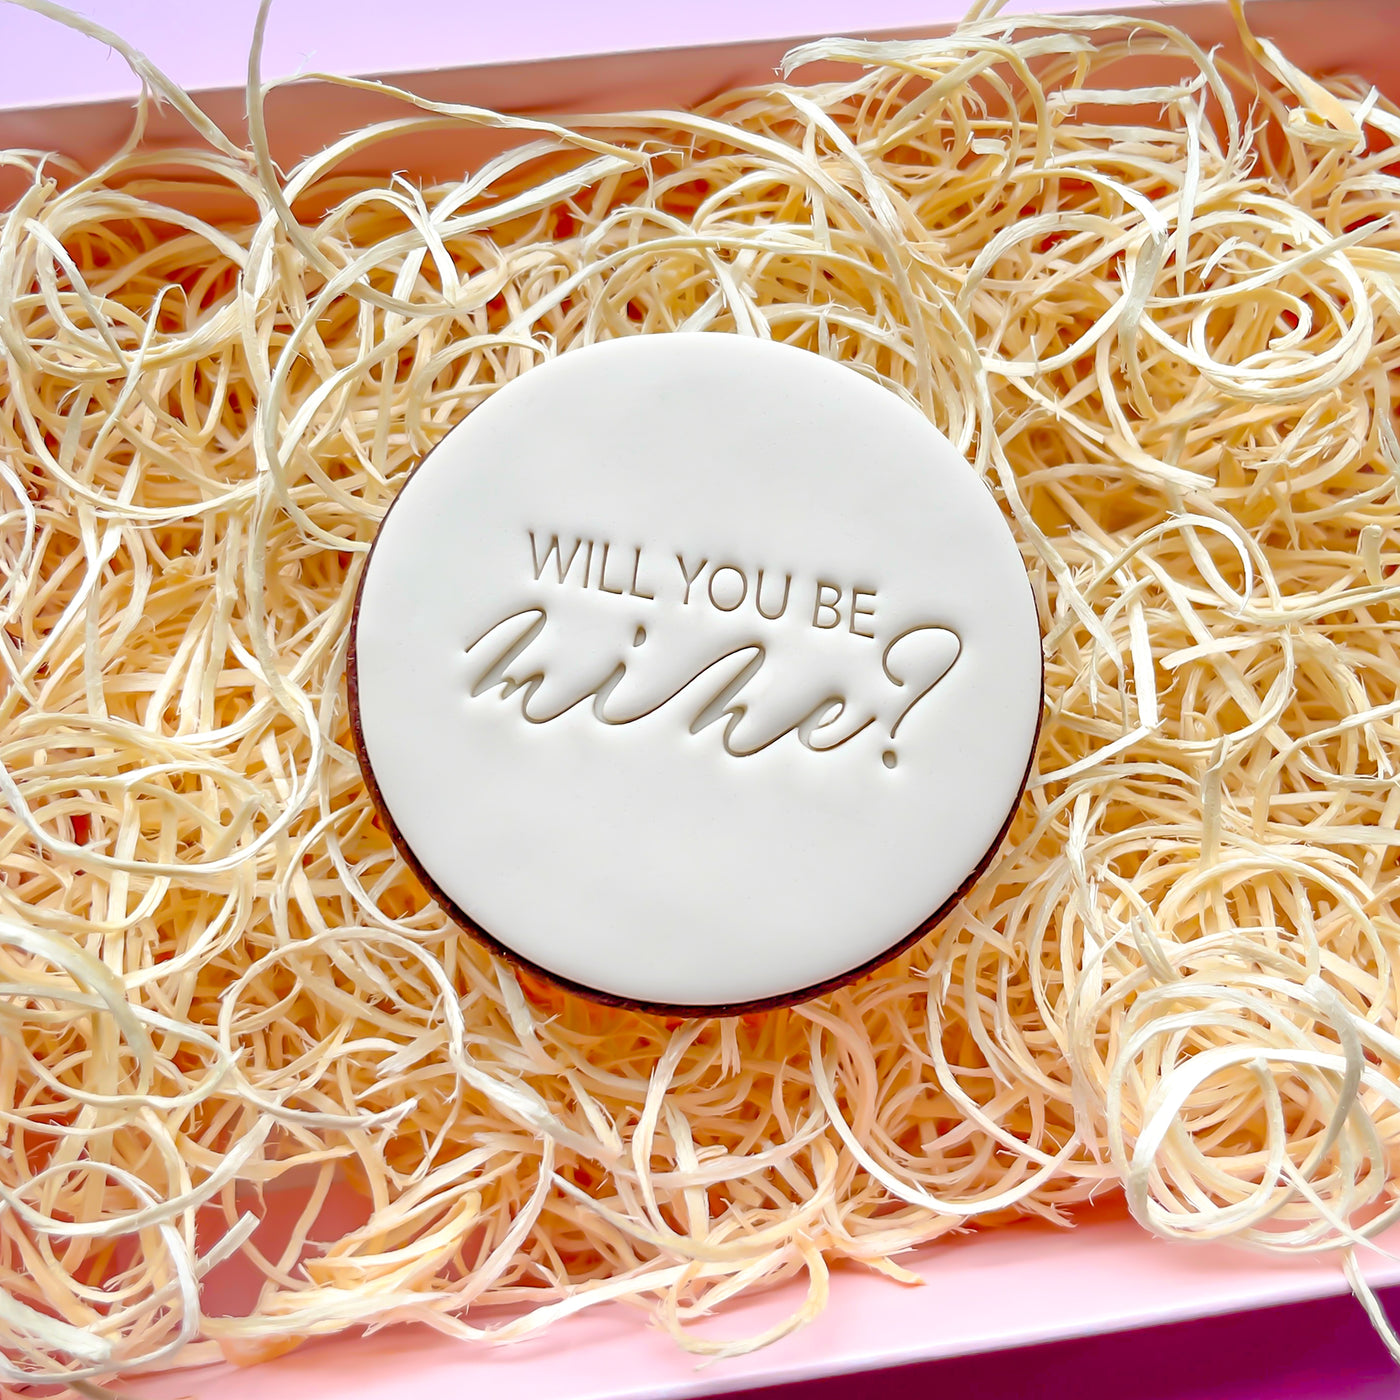 WILL YOU BE MINE IMPRESSION STAMP